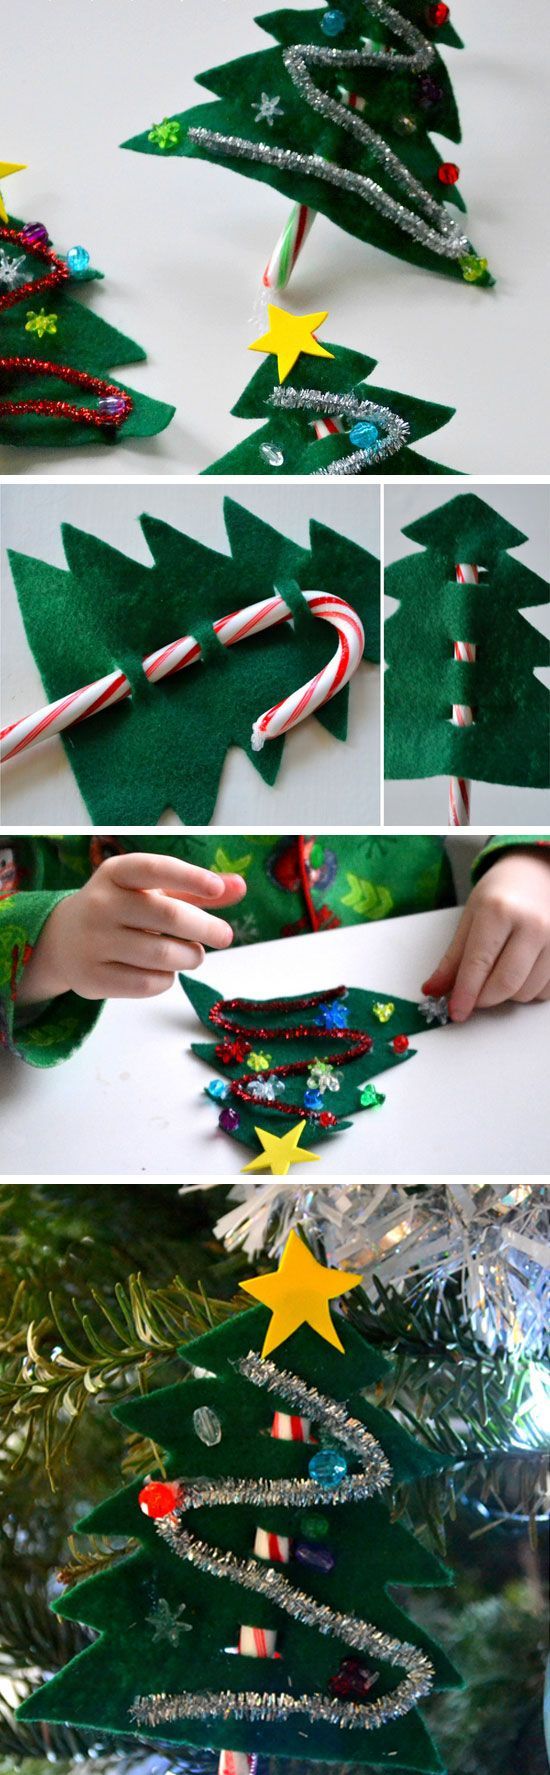 Candy Cane Christmas Trees | DIY Christmas Crafts for Kids to Make